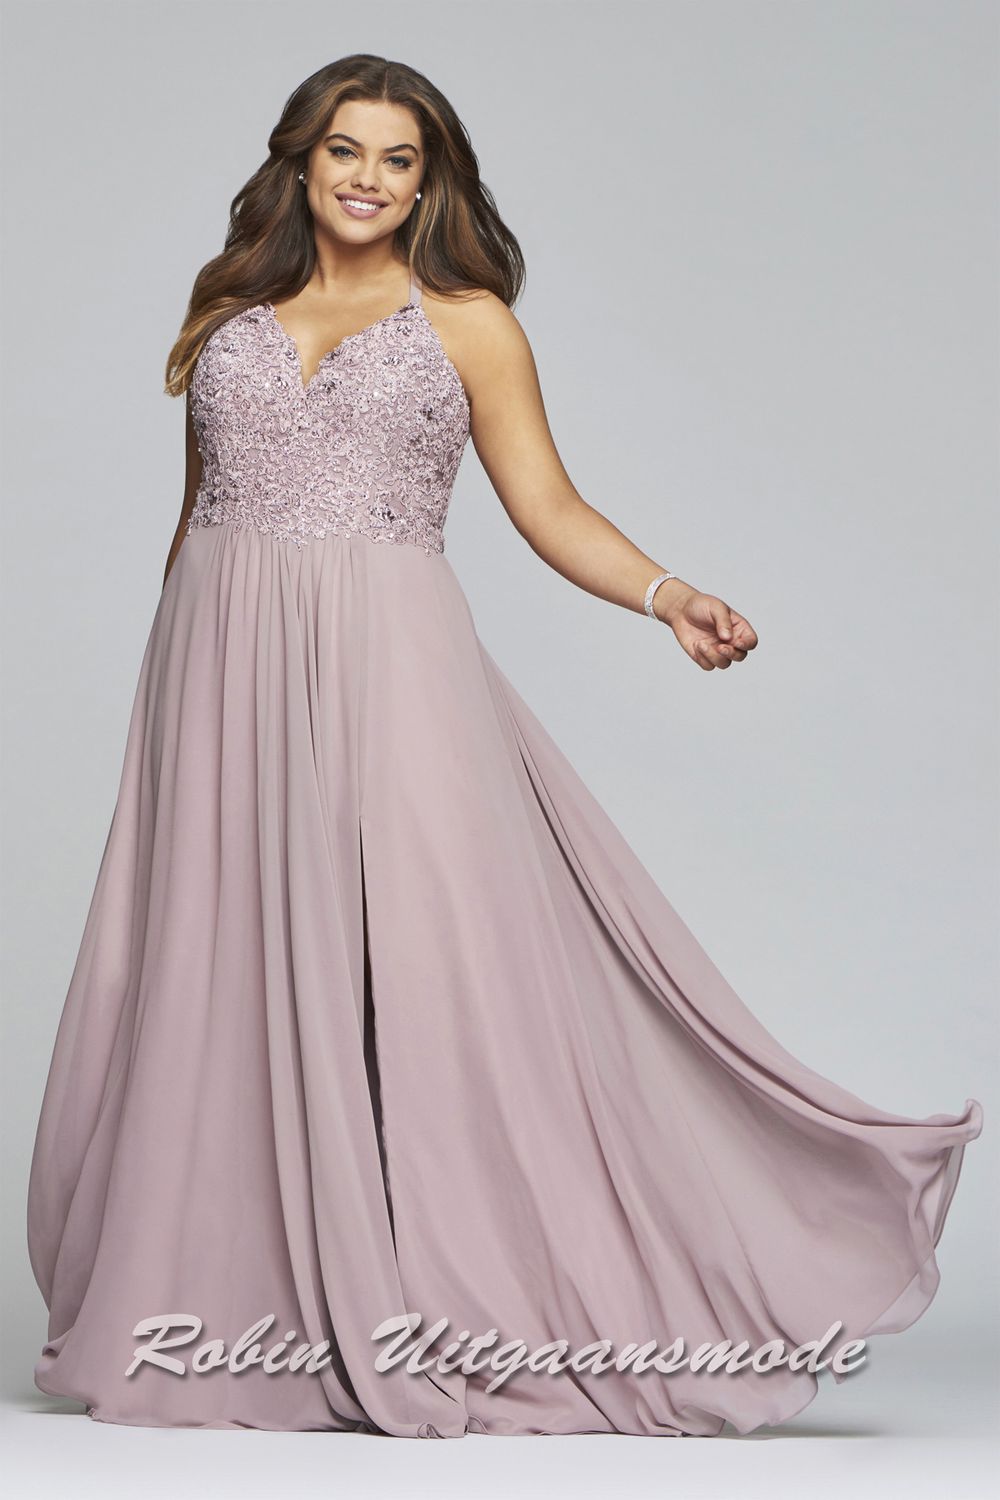 Prom dress with lace bodice, a beautiful long v-neckline and a flared chiffon skirt in the larger sizes.